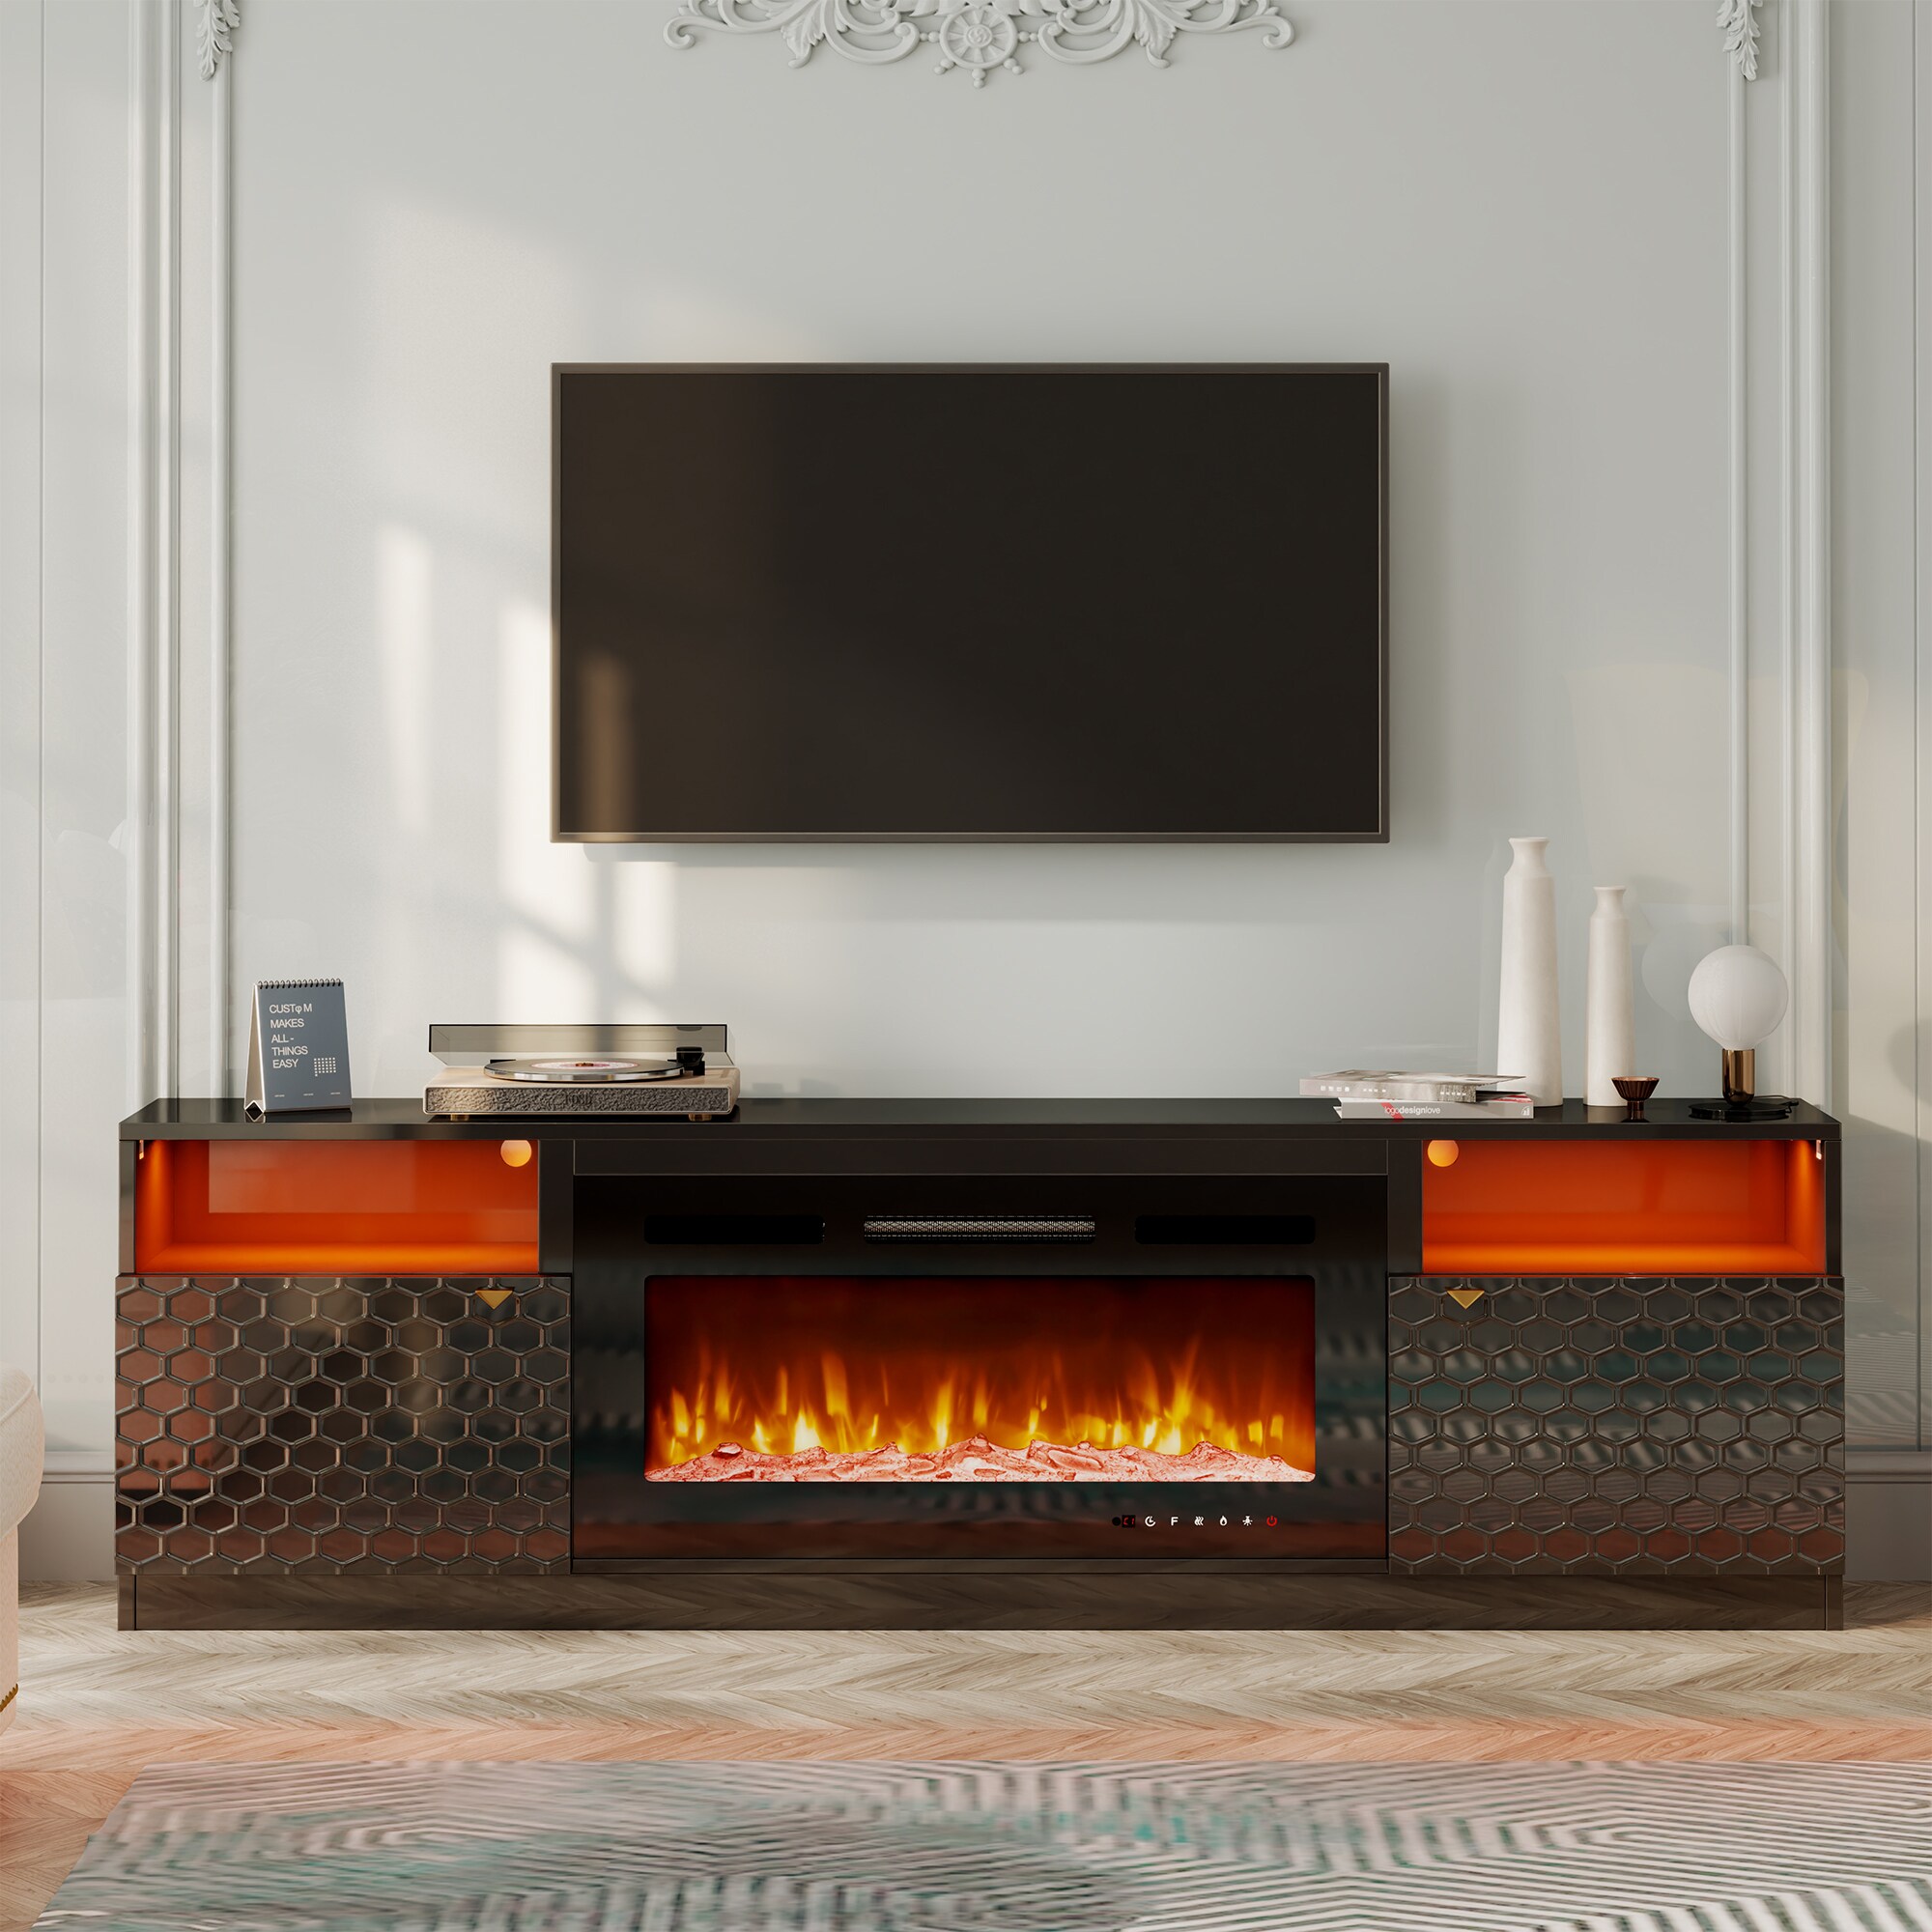 Clihome 71-in W Black TV Stand with Fan-forced Electric Fireplace in ...